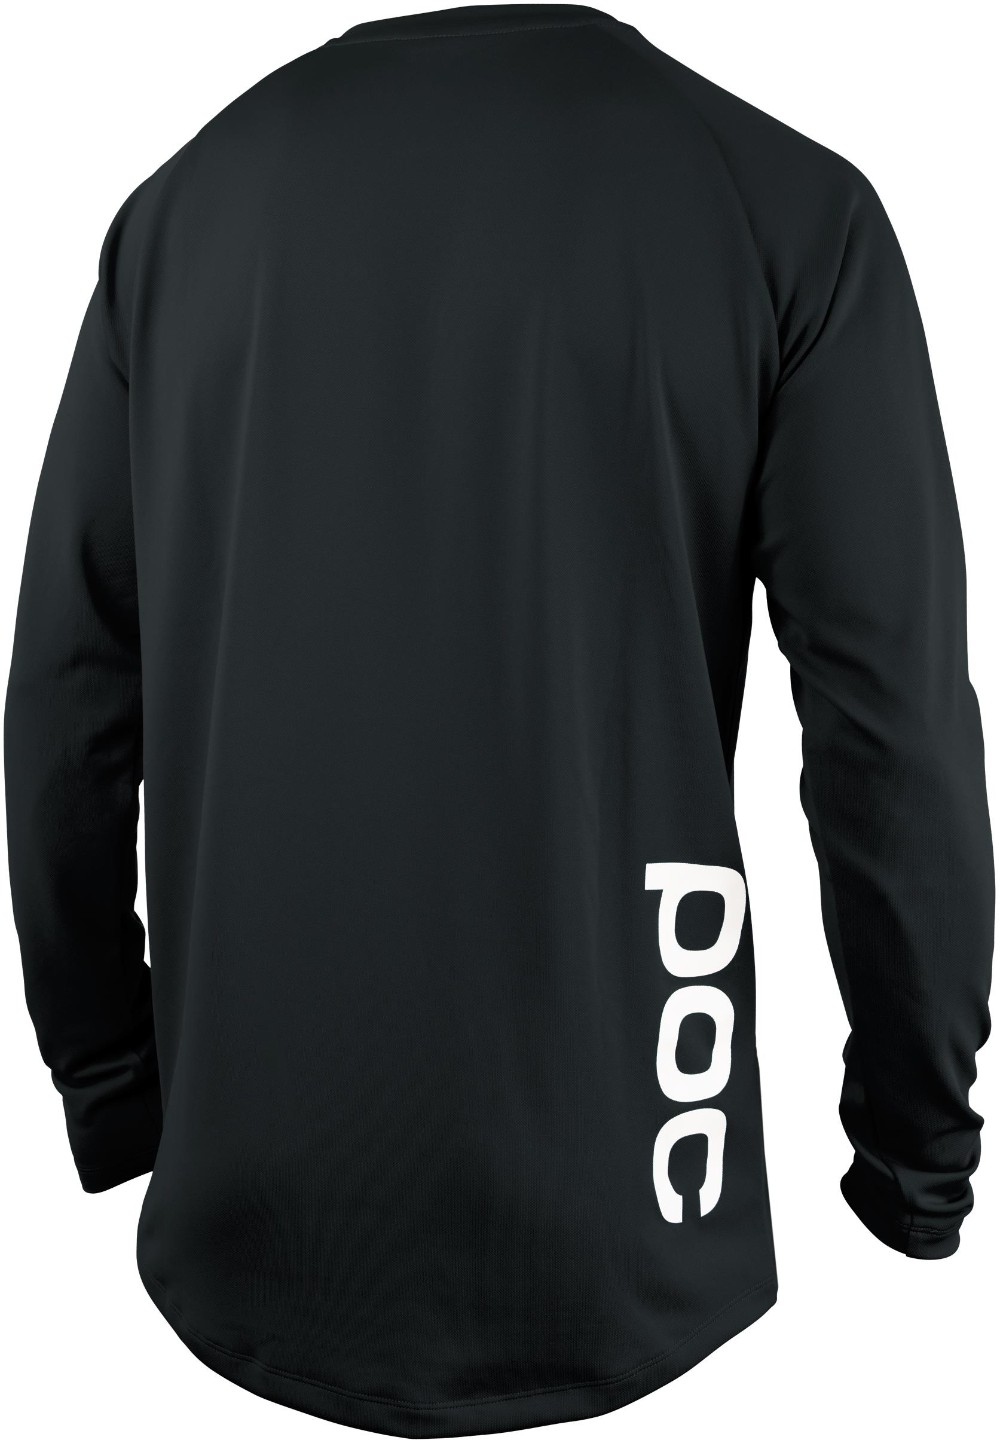 Essential DH Long Sleeve Cycling Jersey image 1